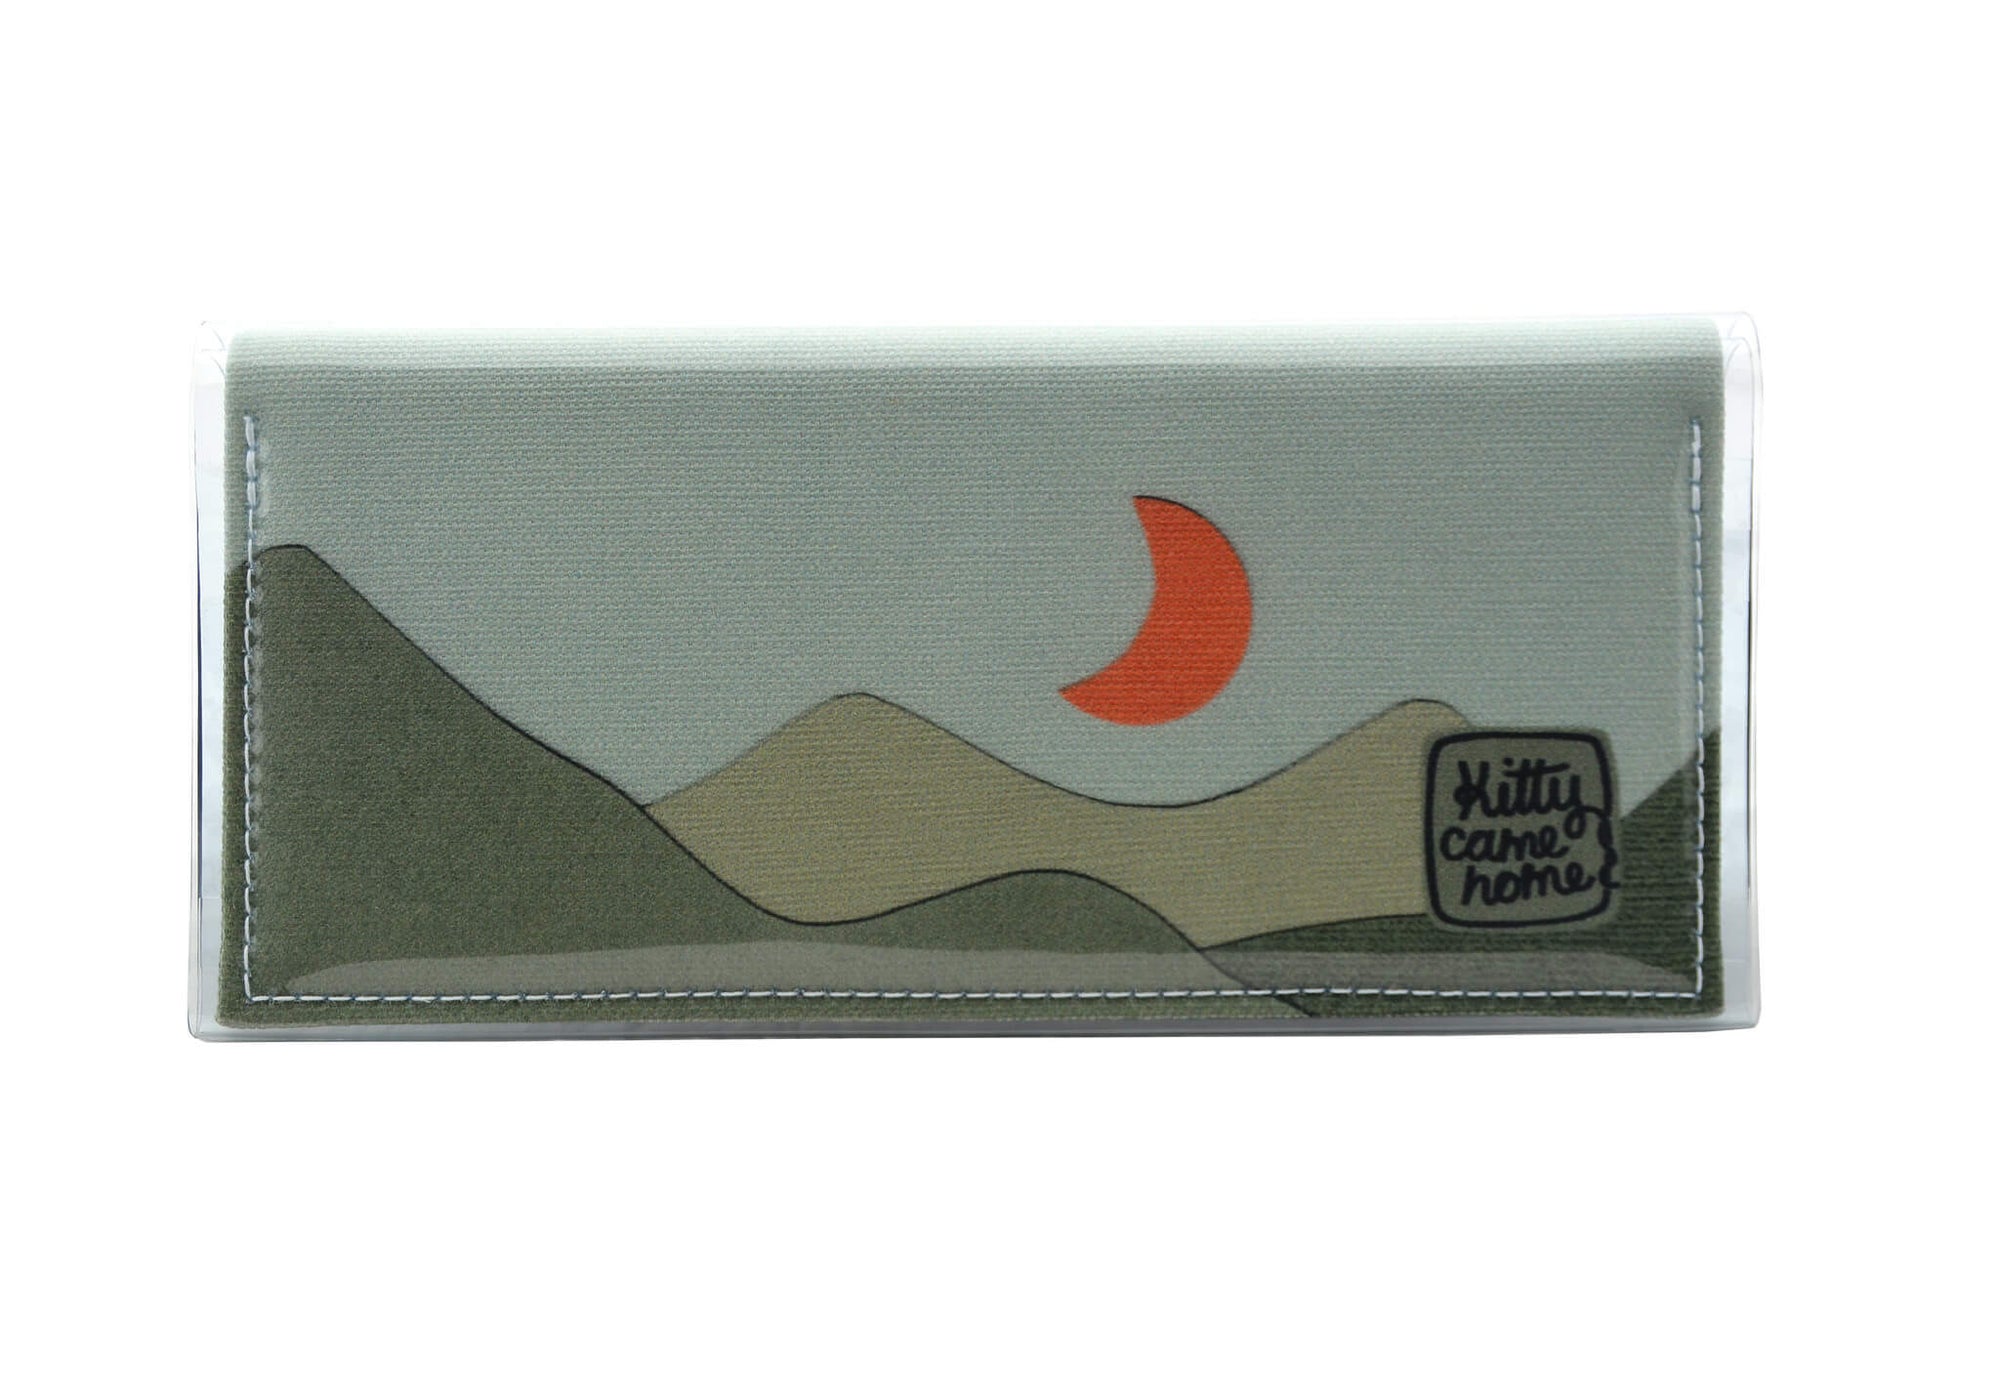 This image shows the front of a Kitty Came Home bifold purse clutch in the 'Moondance' design by Satin and Tat. An orange crescent moon floats above a landscape of dark green hills. This is the standard size.